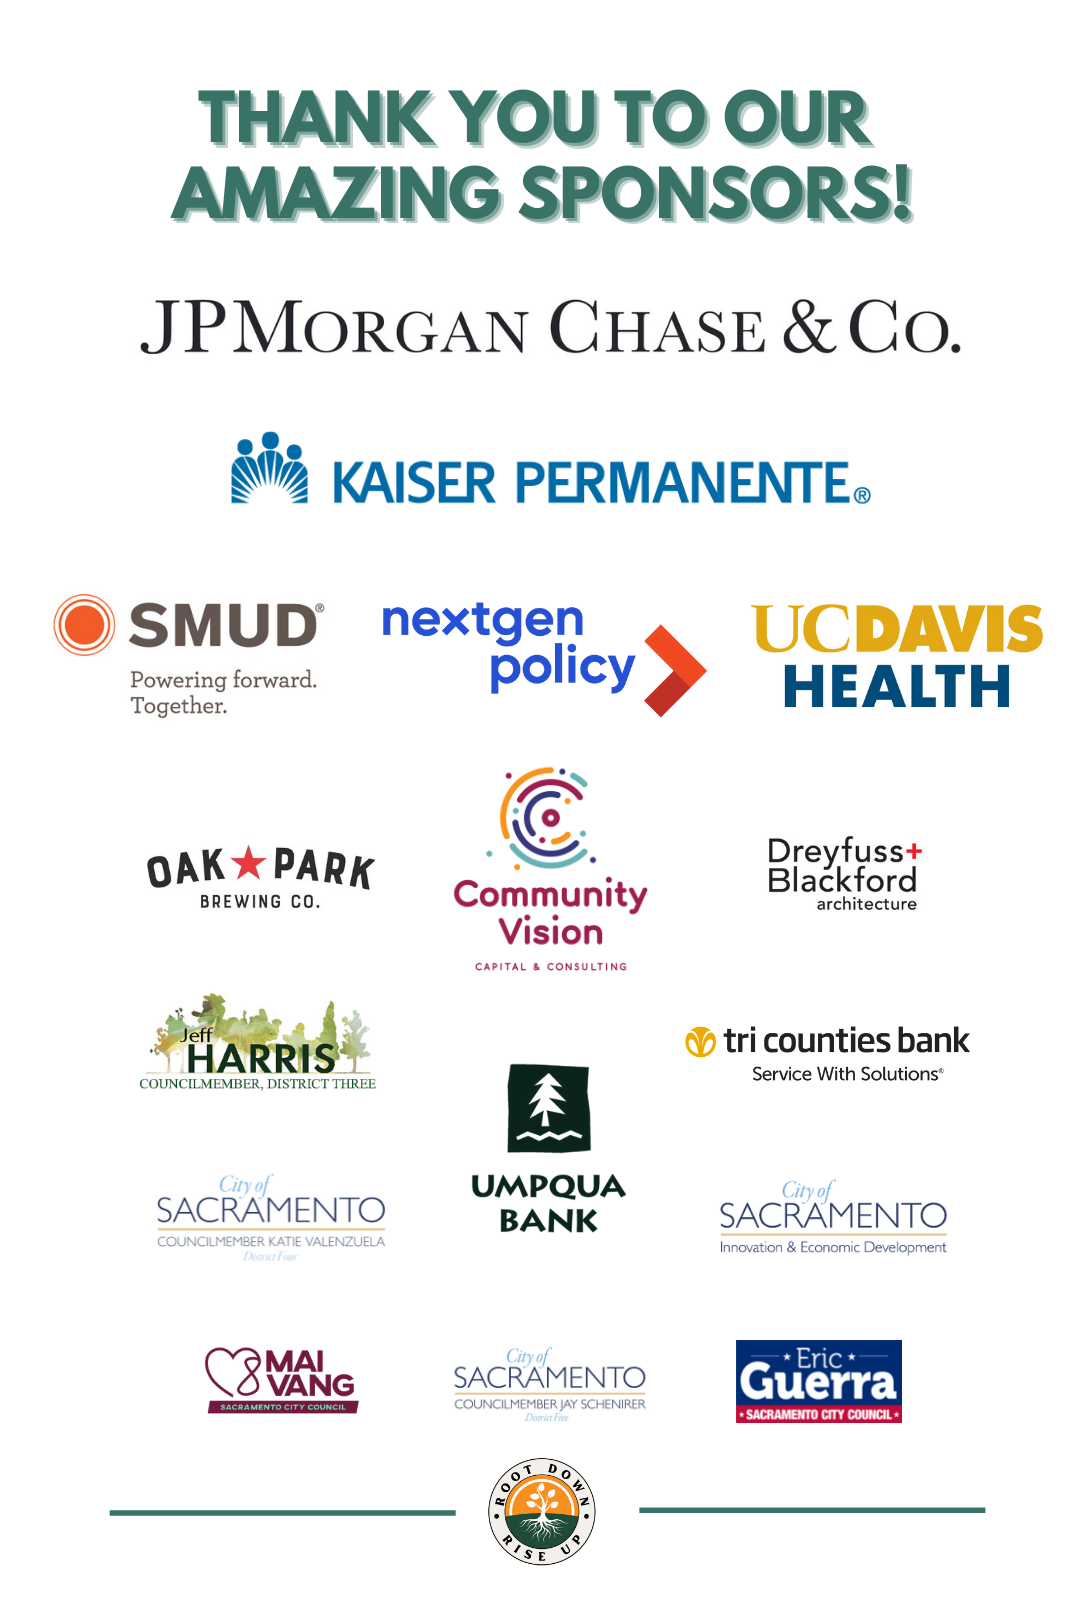 This image depicts the logos for organizations and businesses sponsoring Root Down, Rise Up 2022. It includes JP Morgan Chase, Kaiser Permanente, SMUD, NextGen Policy, UCDavis Health, Oak Park Brewing Co, Community Vision, Dreyfuss and Blackford, Umpqua Bank, Tri Counties Bank, City of Sacramento Office of Innovation and Economic Development, and the Sacramento City Council offices of Councilmembers Guerra, Harris, Schenirer, Valenzuela, and Vang